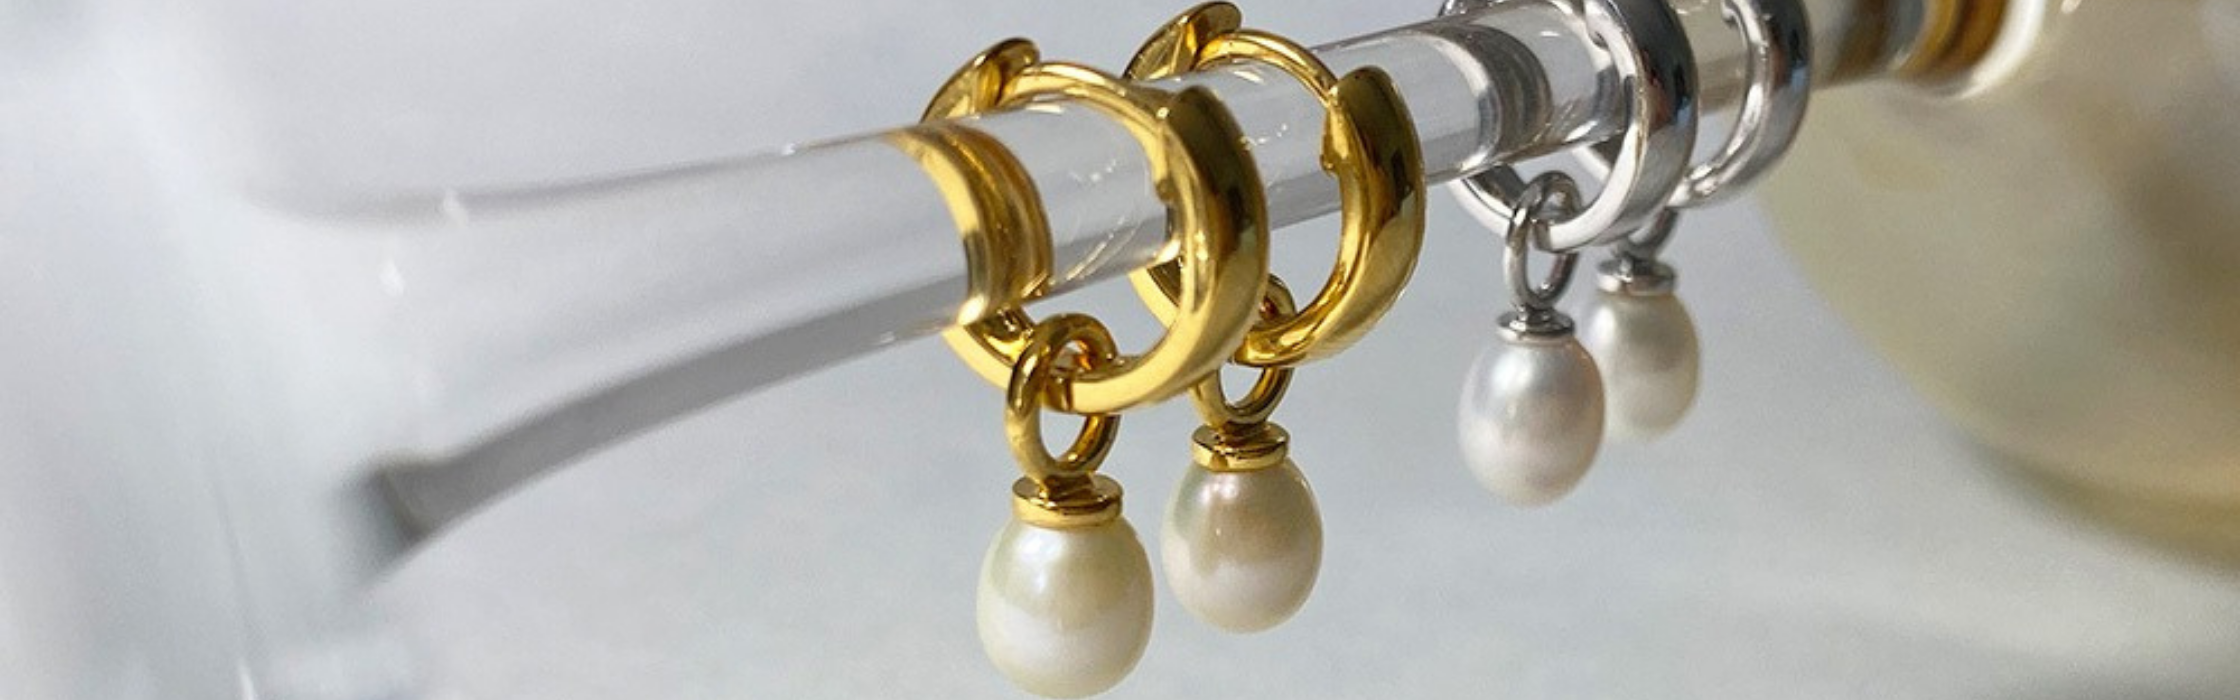 Picture of several hoop earrings with pearls on display made by Jersey Pearl